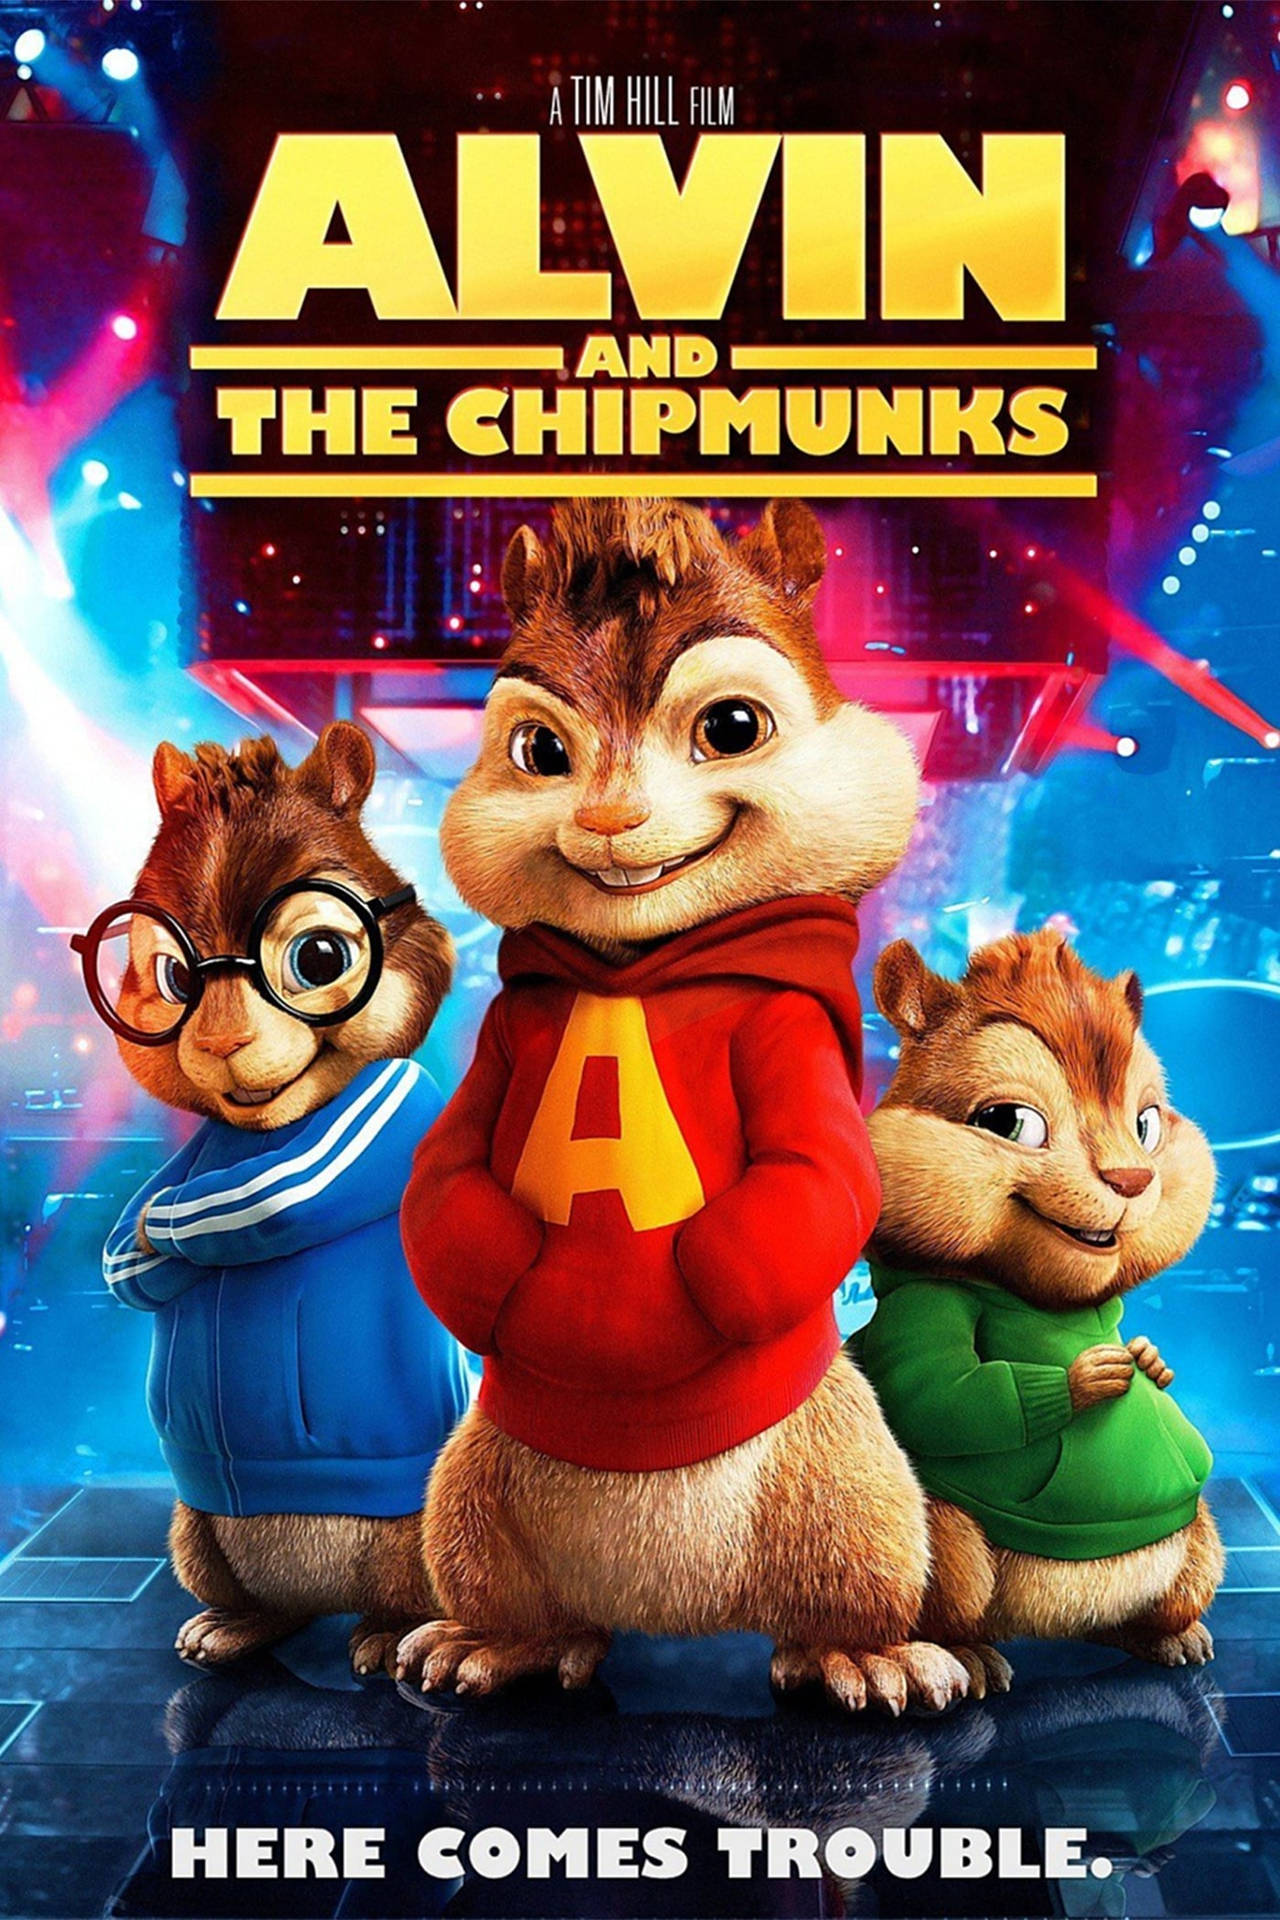 Alvin And The Chipmunks Trouble Wallpaper